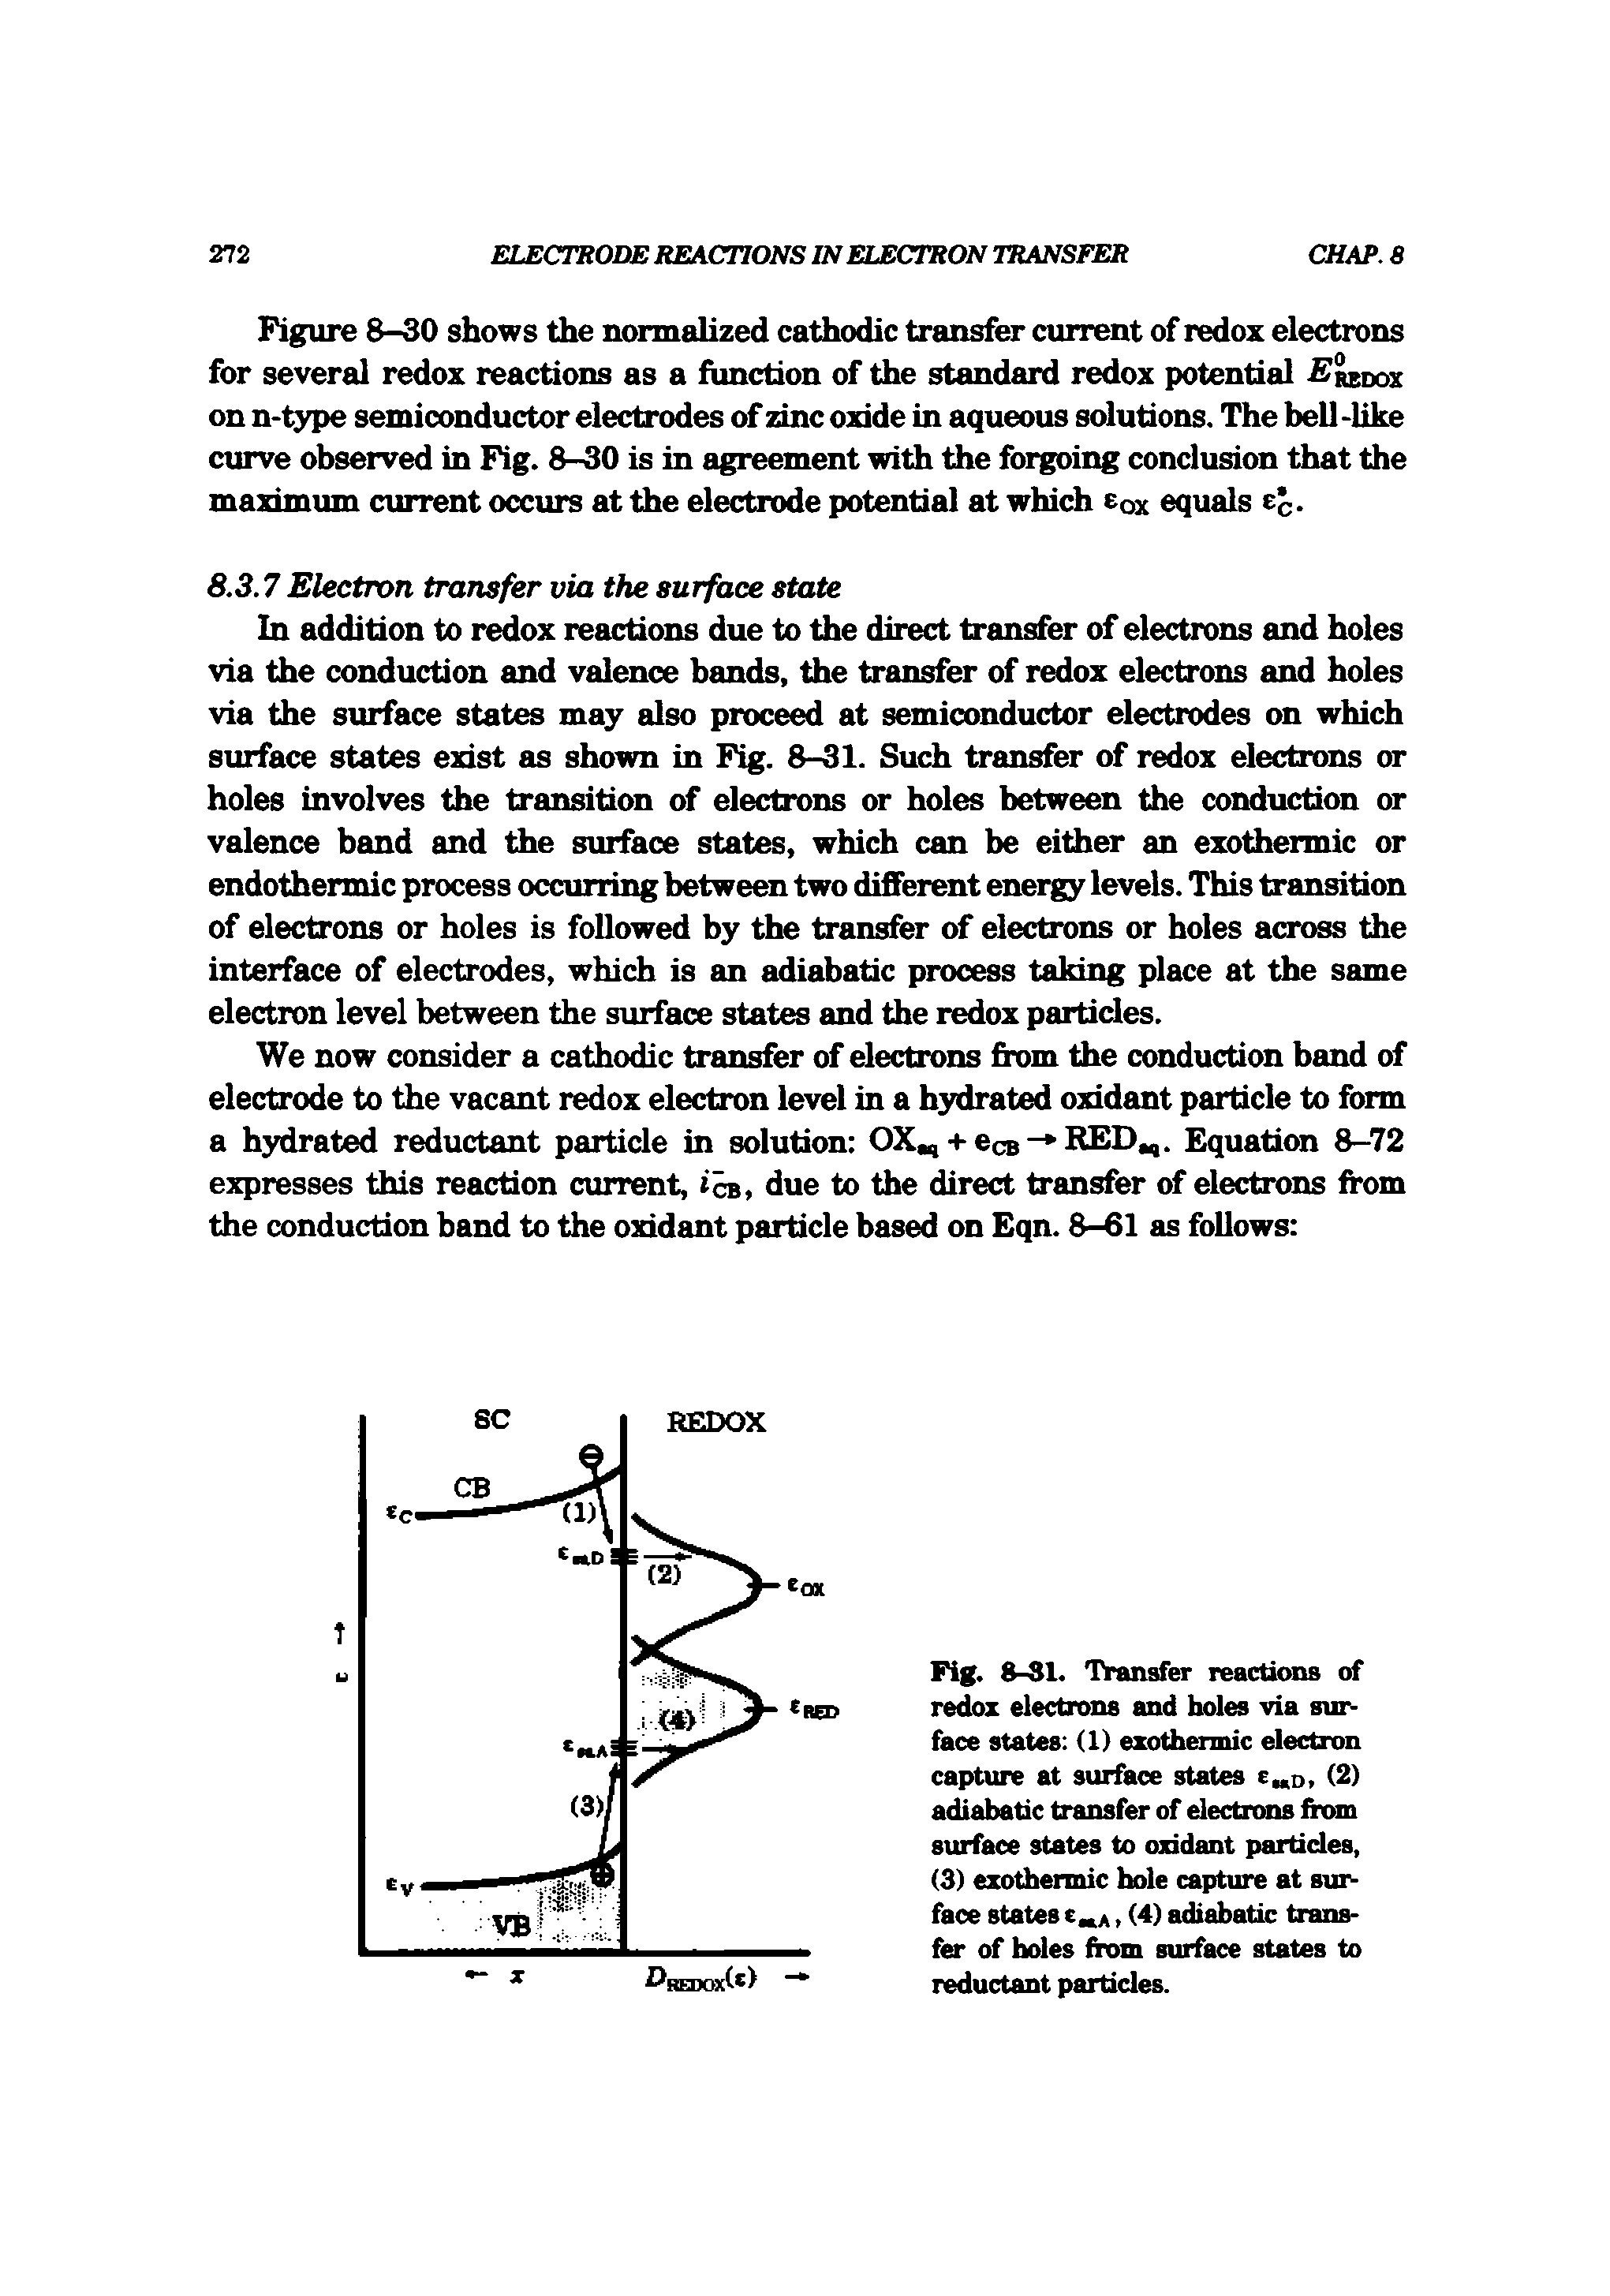 Fig. 8-31. Transfer reacdons of redox electrons and holes via sin face states (1) exothermic election capture at surface states c d, (2) adiabatic transfer of electrons from surface states to oxidant particles, (3) exothermic hole capture at sui> face states, (4) adiabatic transfer of holes from surface states to reductant particles.